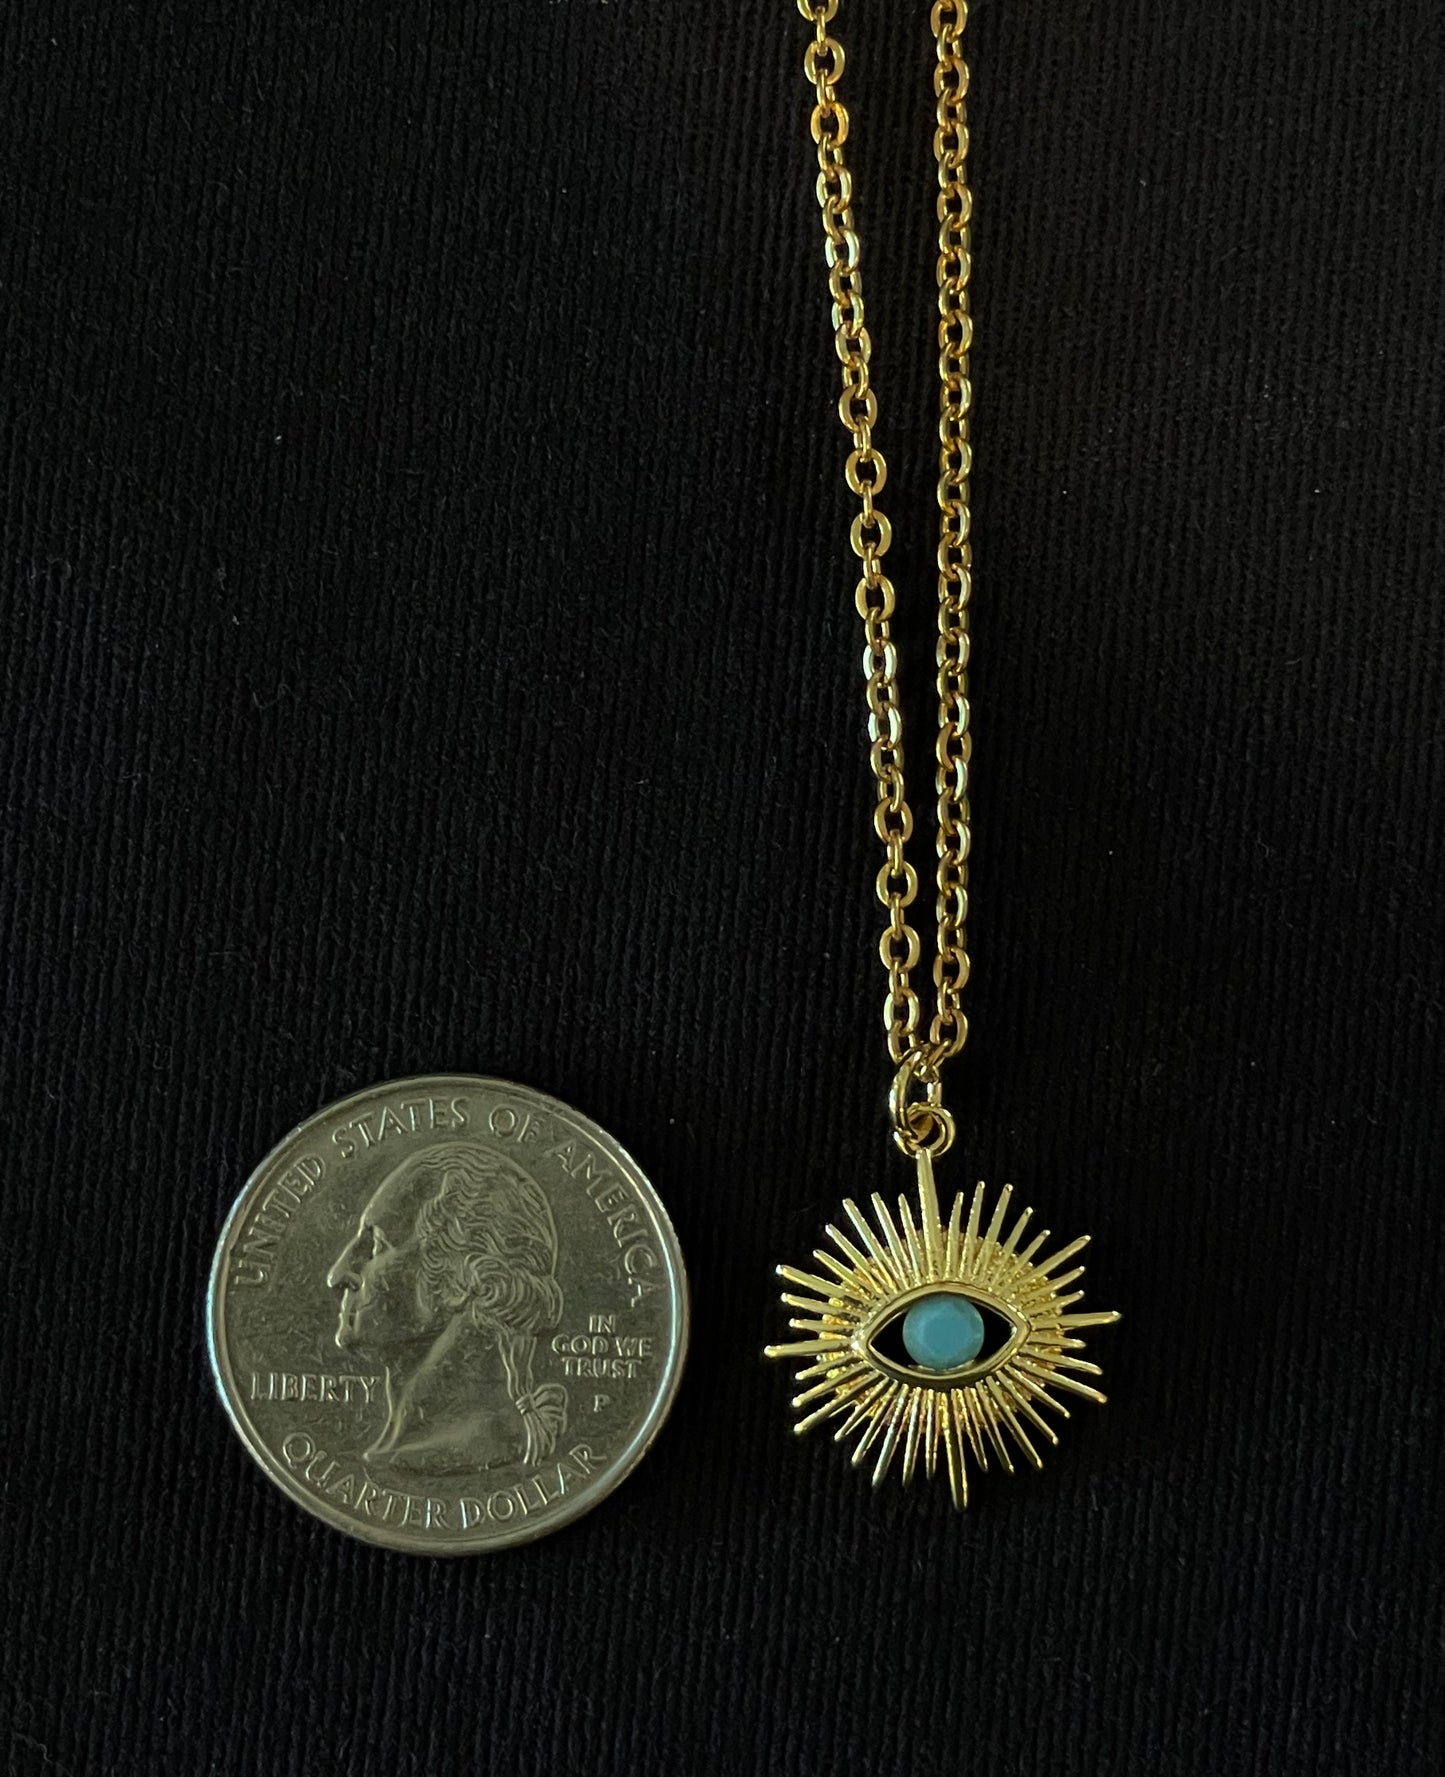 Gold starburst evil eye pendant with turquoise stone on chain